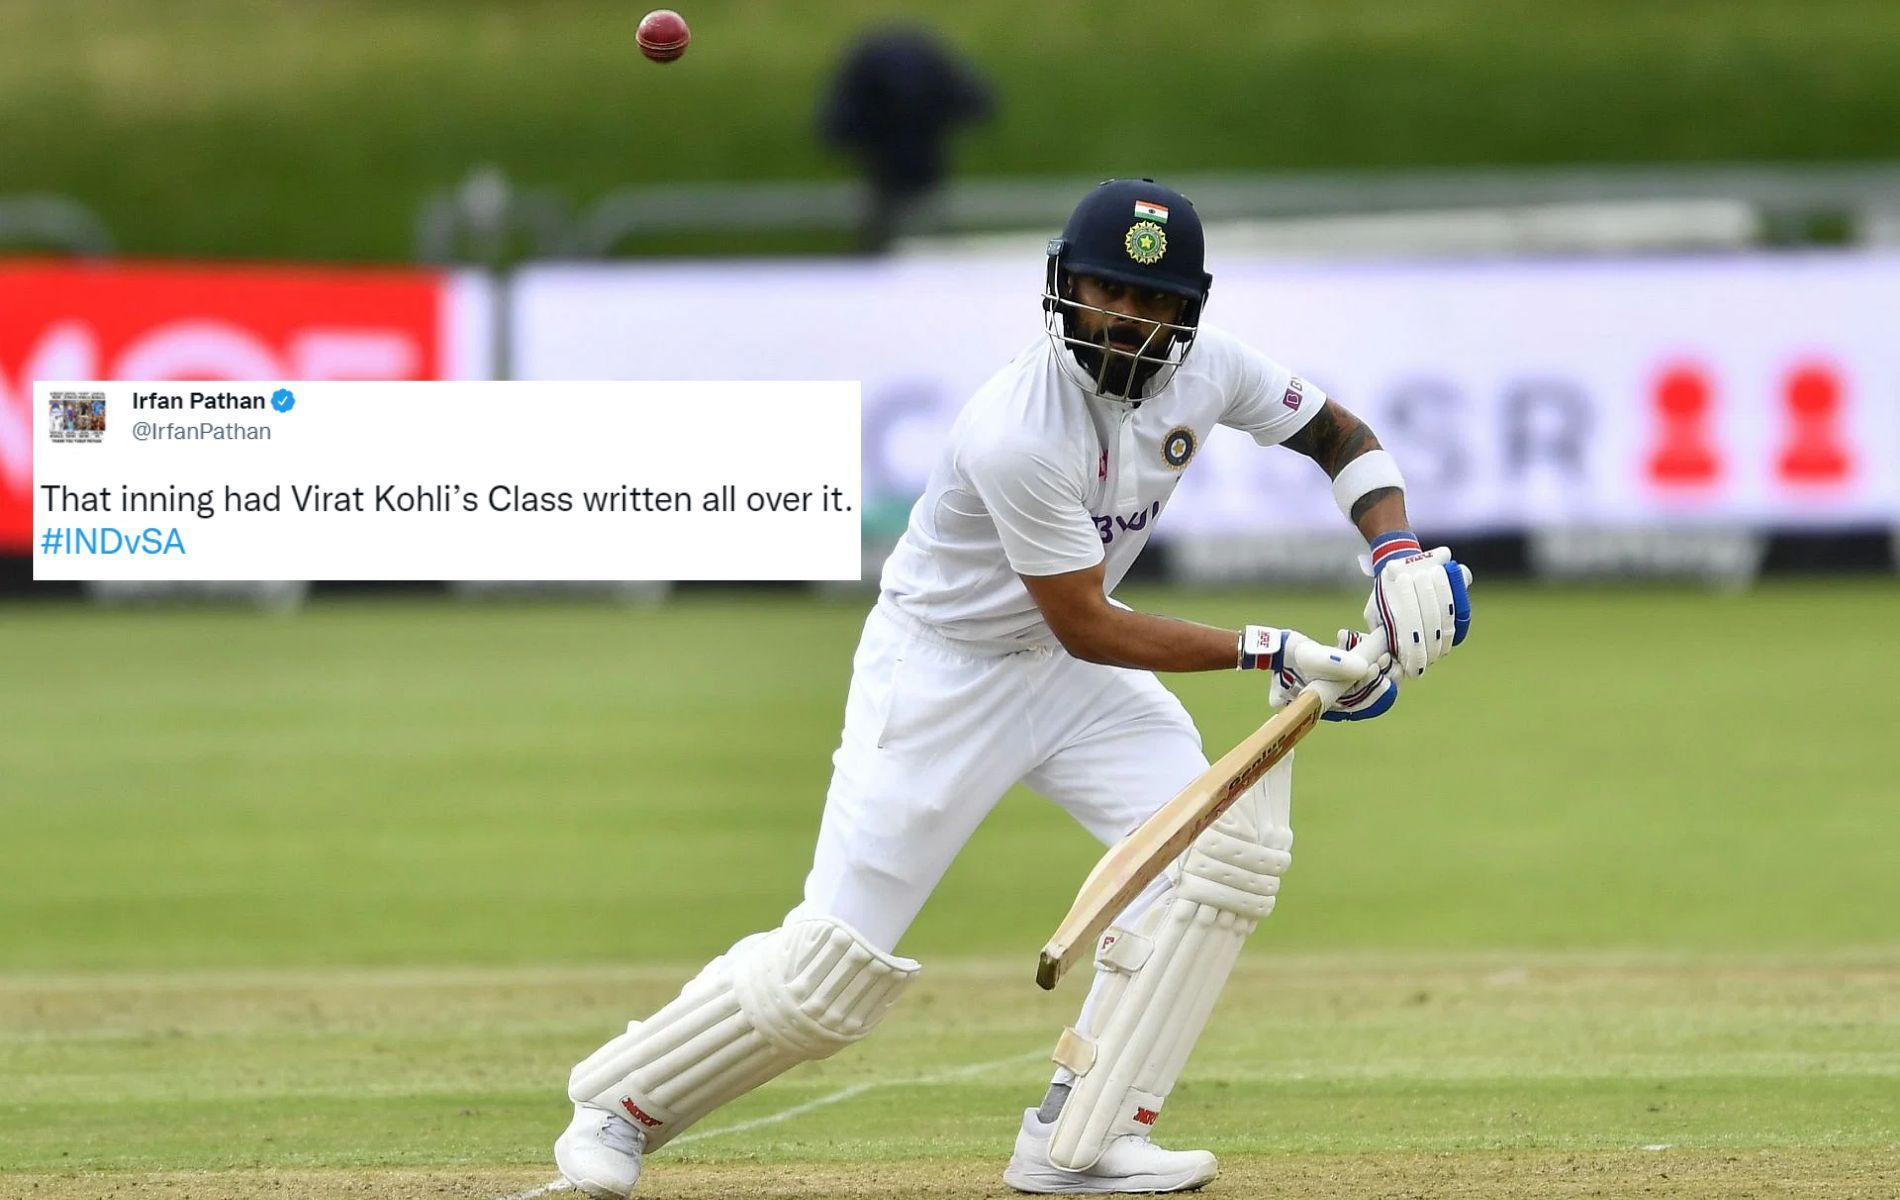 The India captain played a gritty knock of 79 amid another poor batting display by the team.